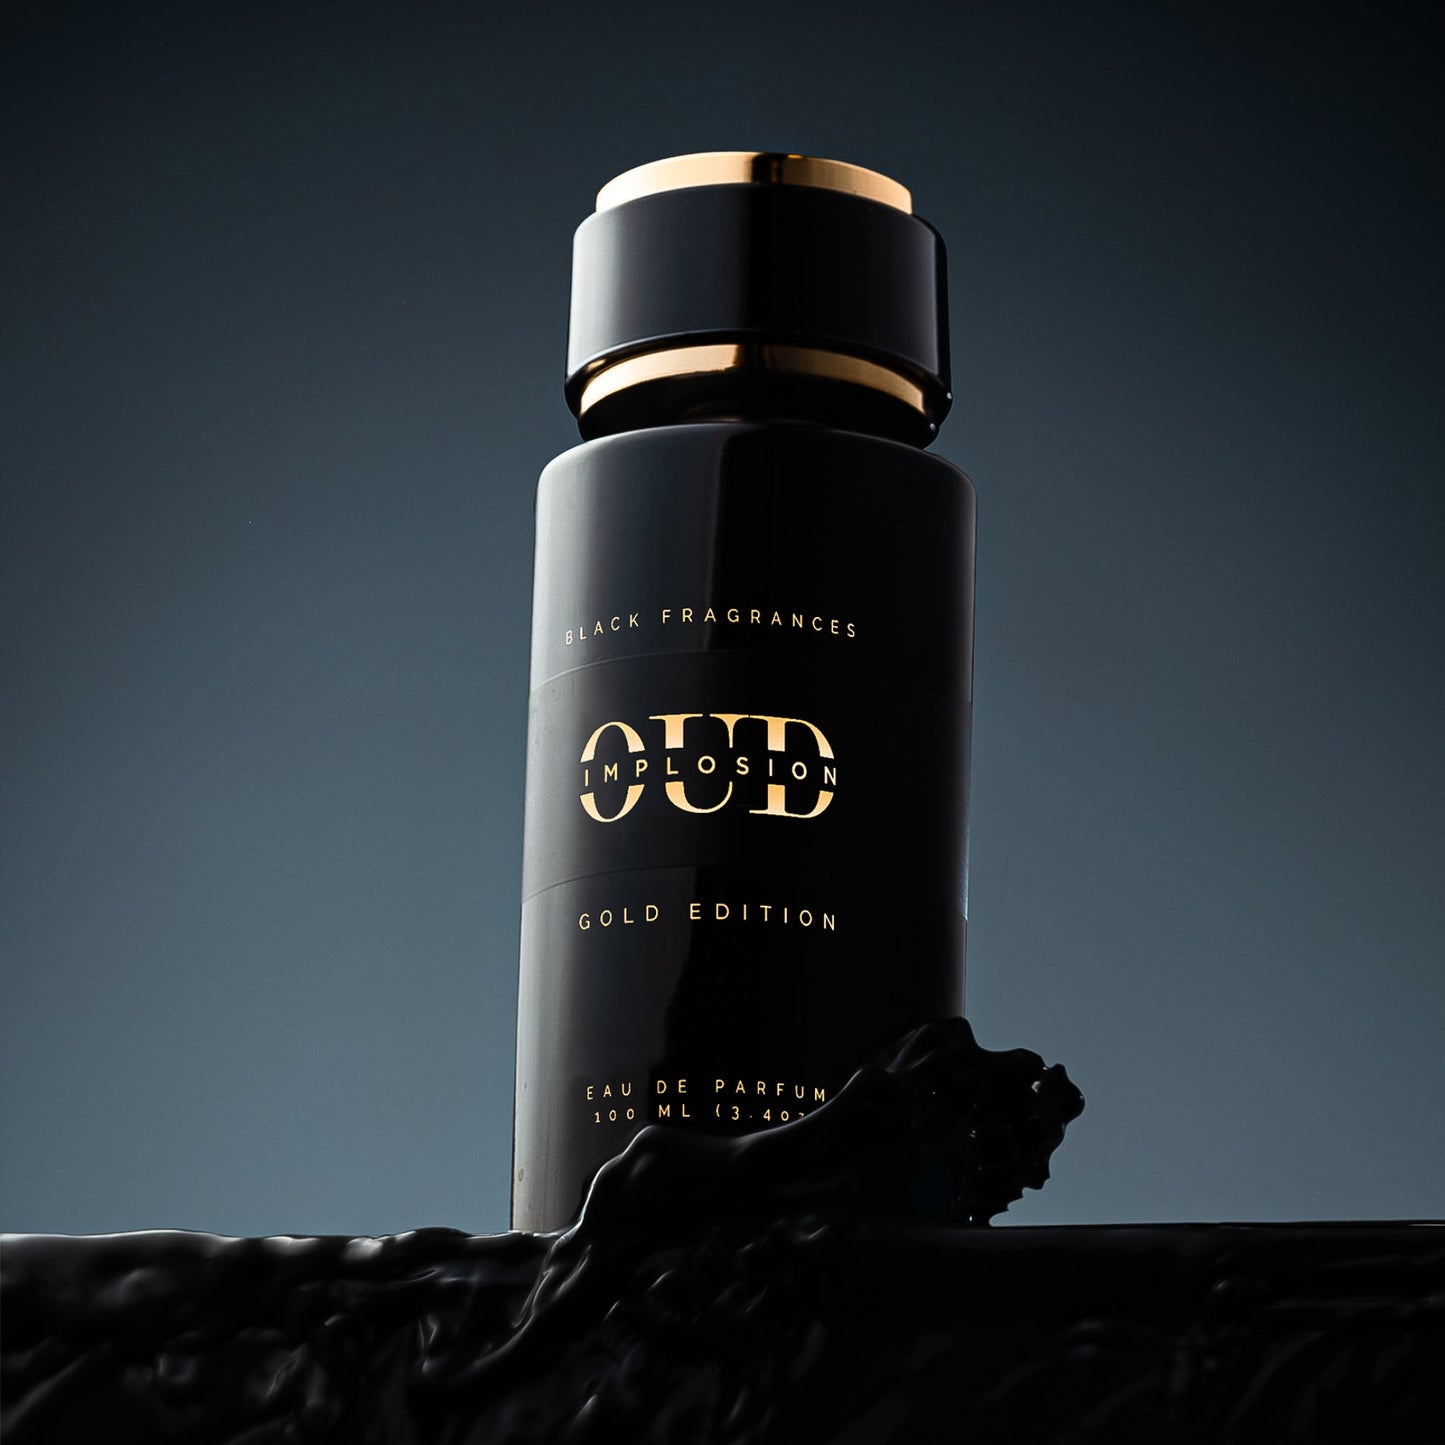 Oud Implosion